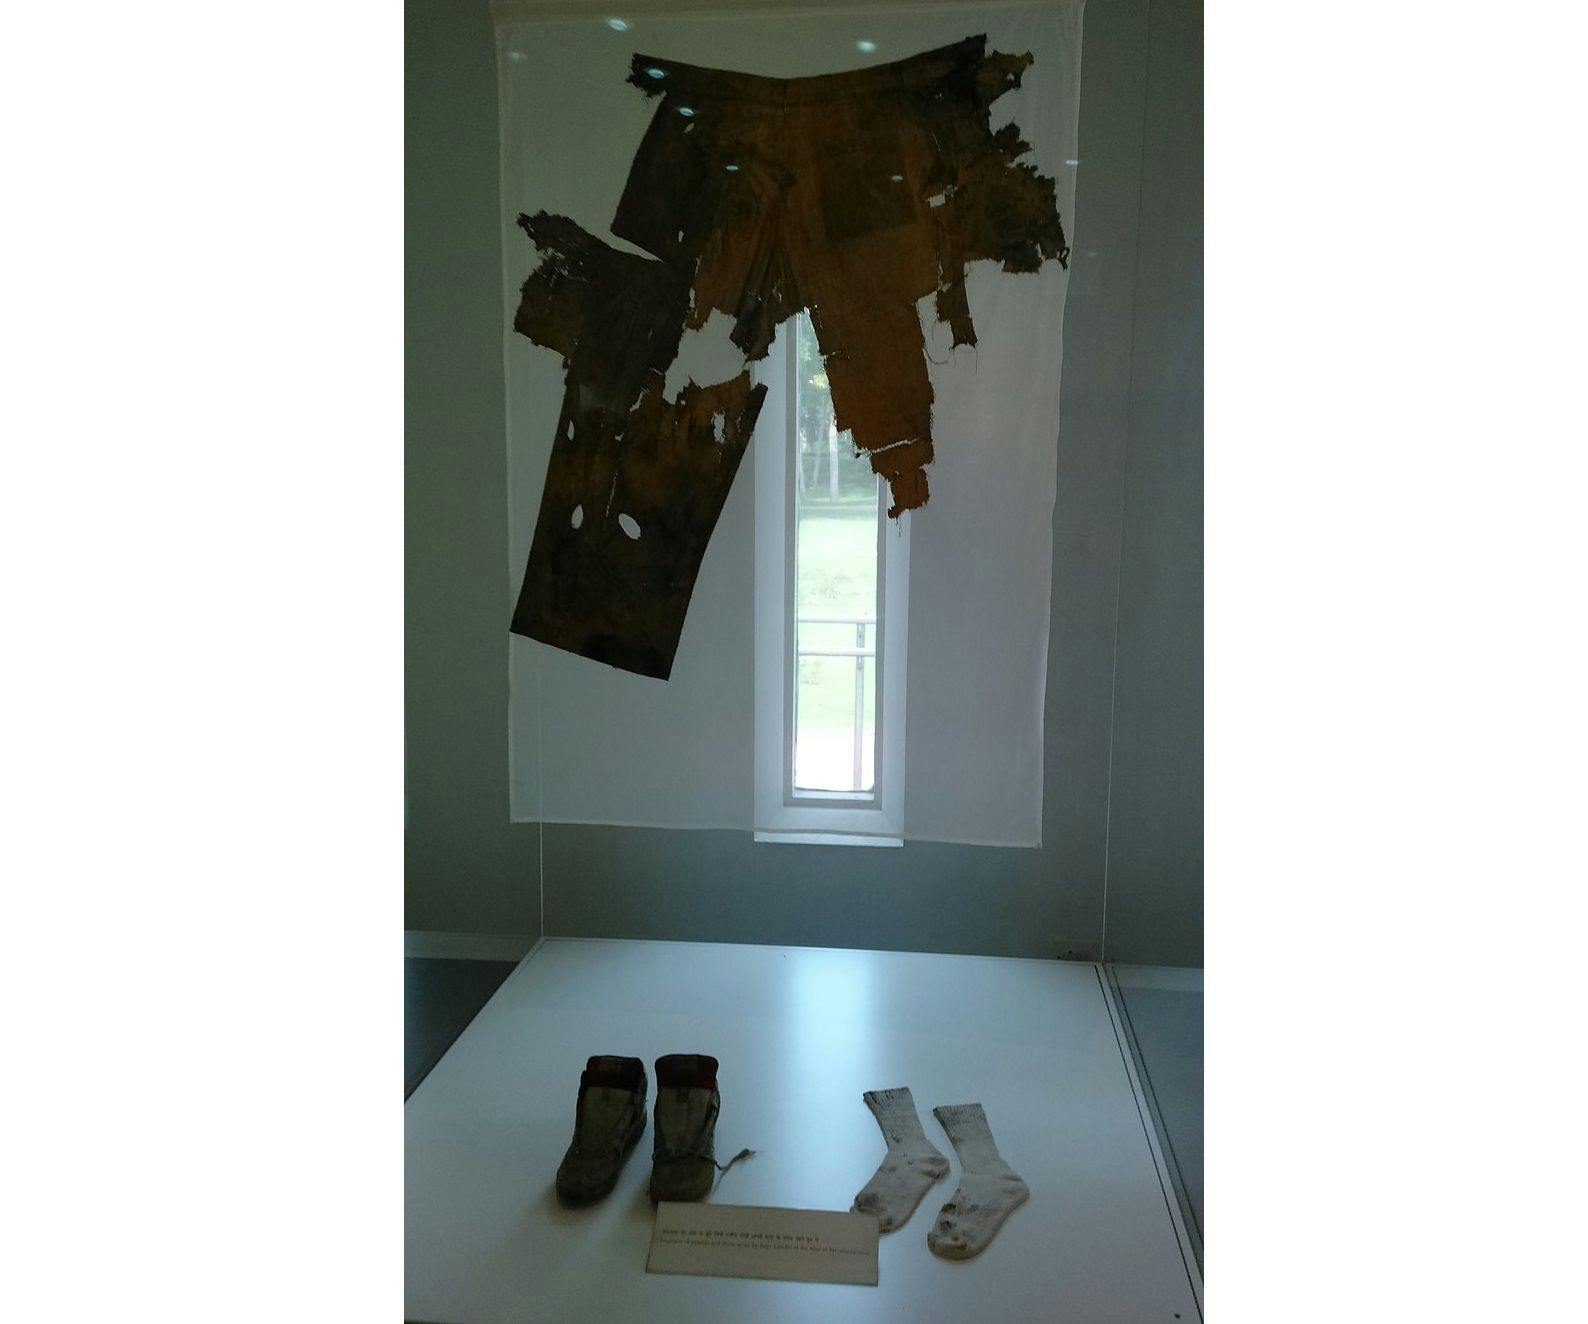 Remains of clothing worn by Rajiv Gandhi during his assassination 